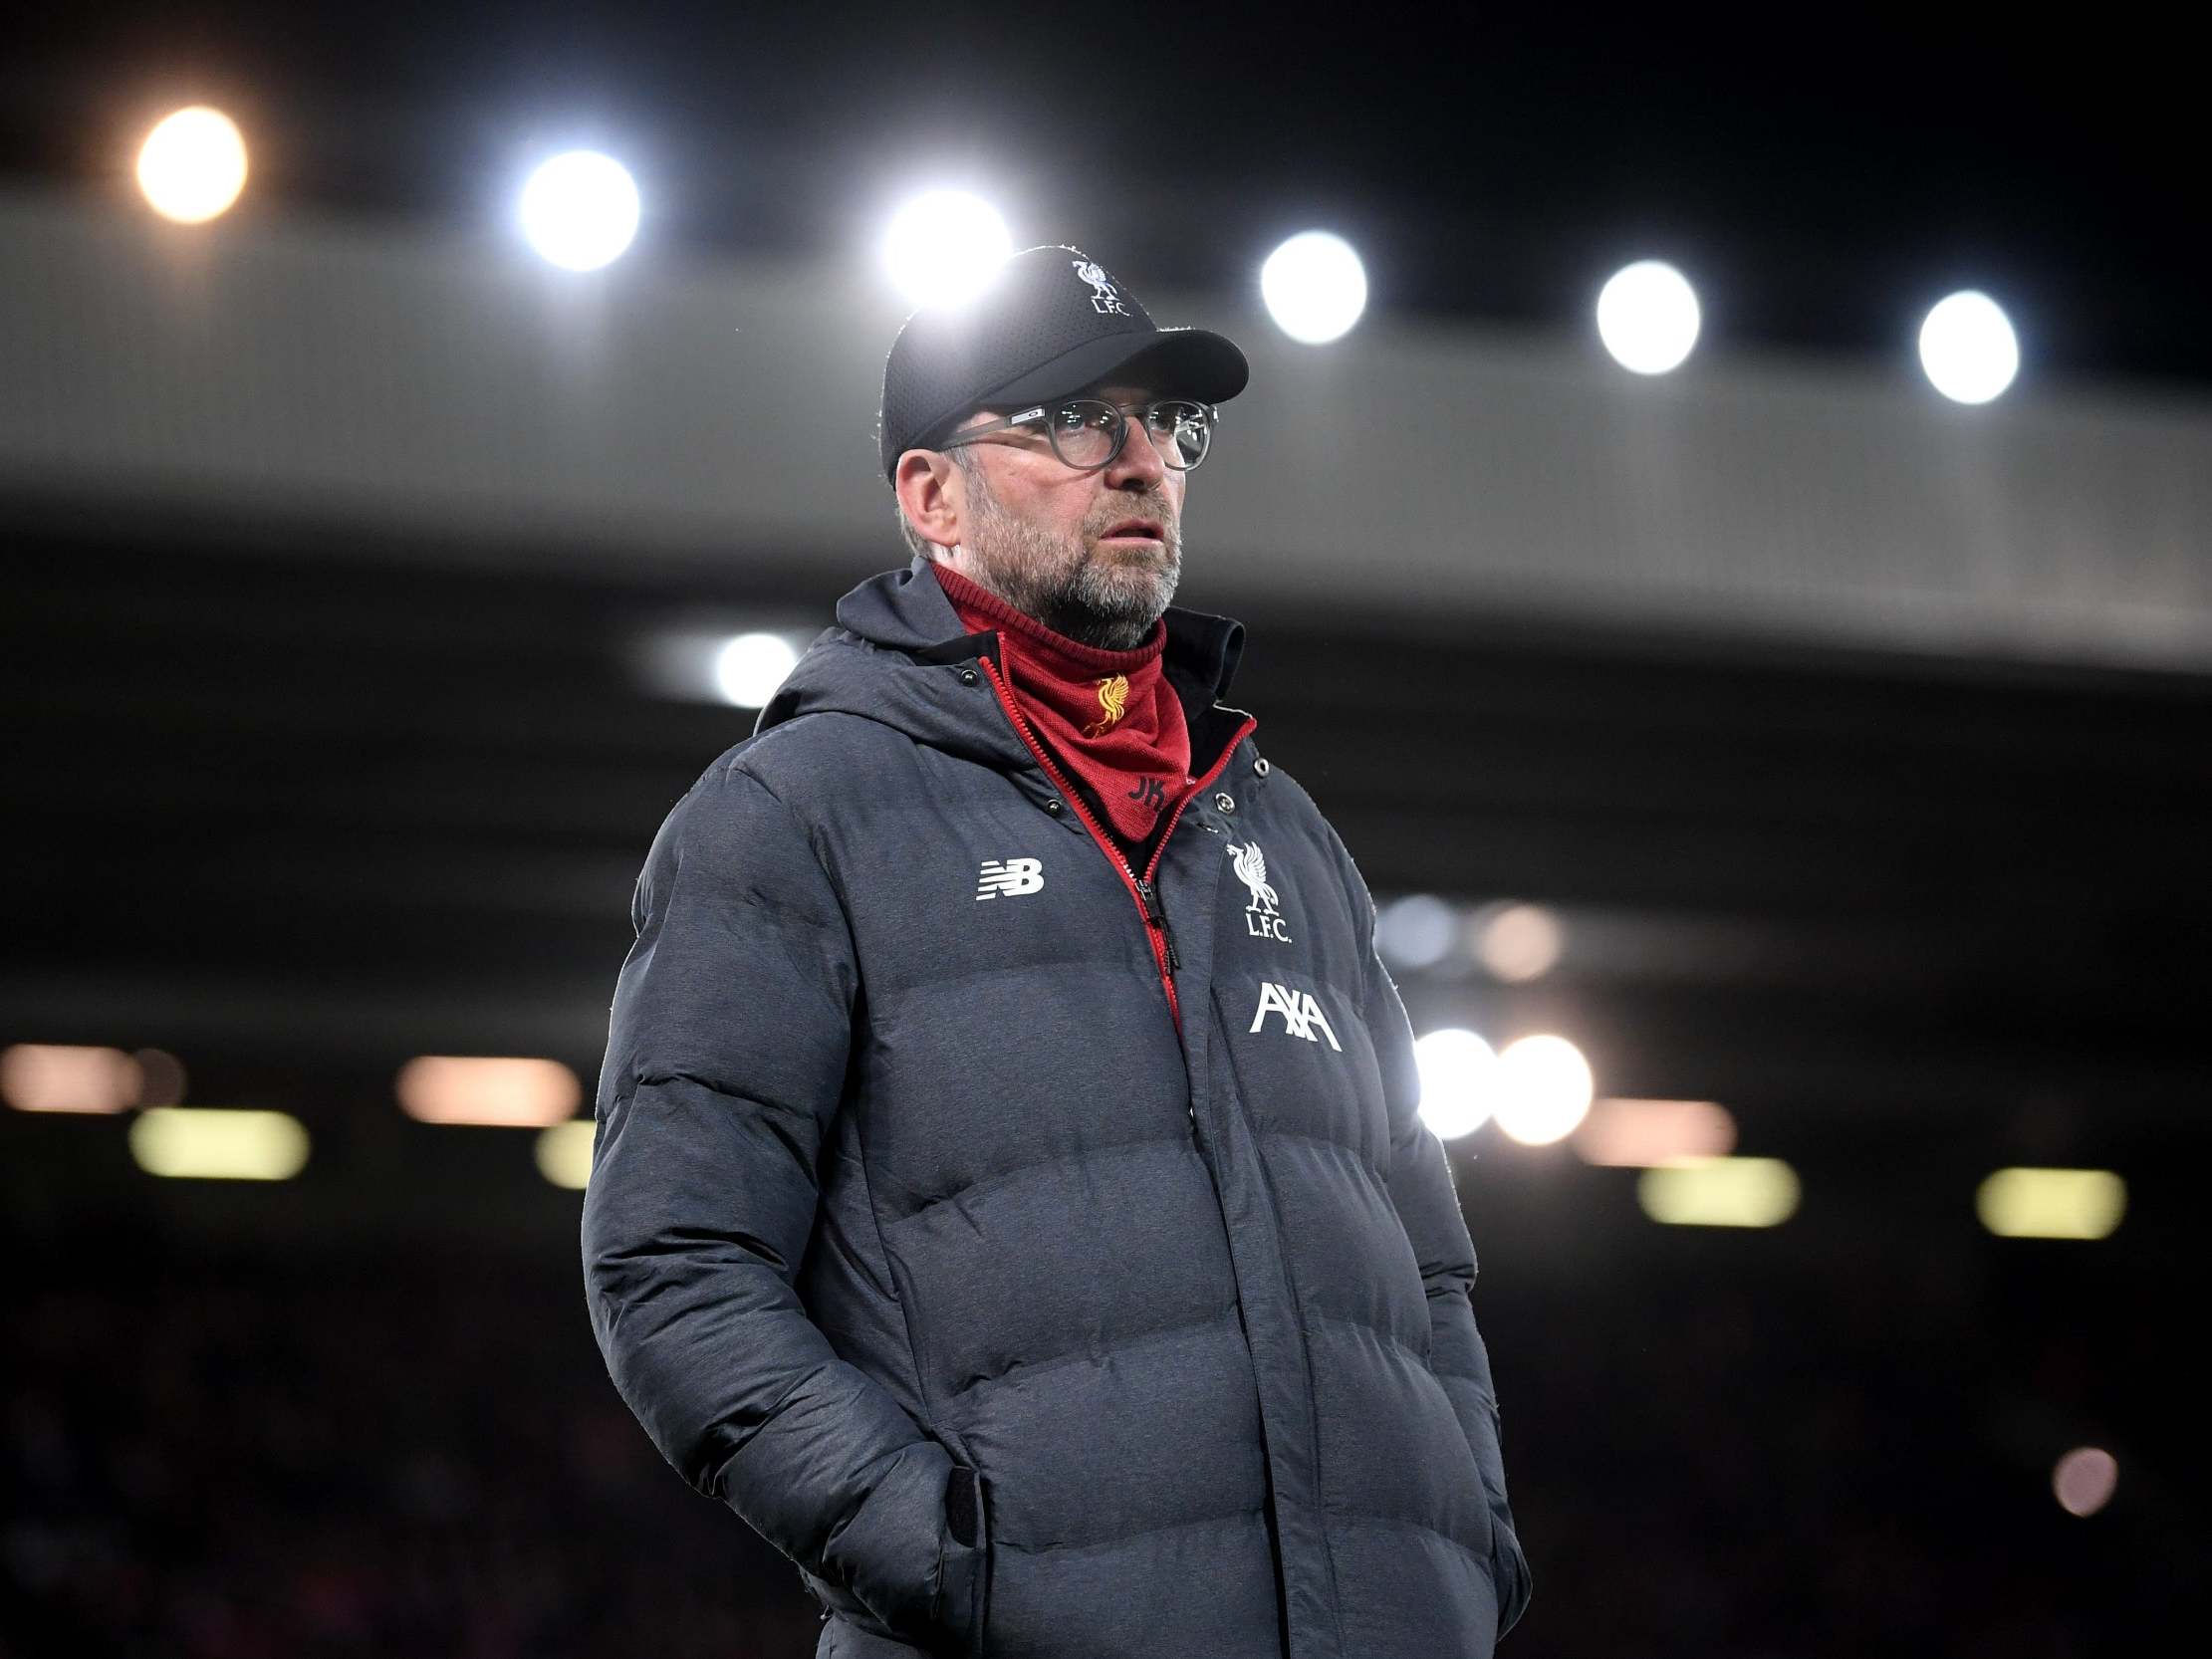 Jurgen Klopp has backed Liverpool to bounce back after Champions League defeat